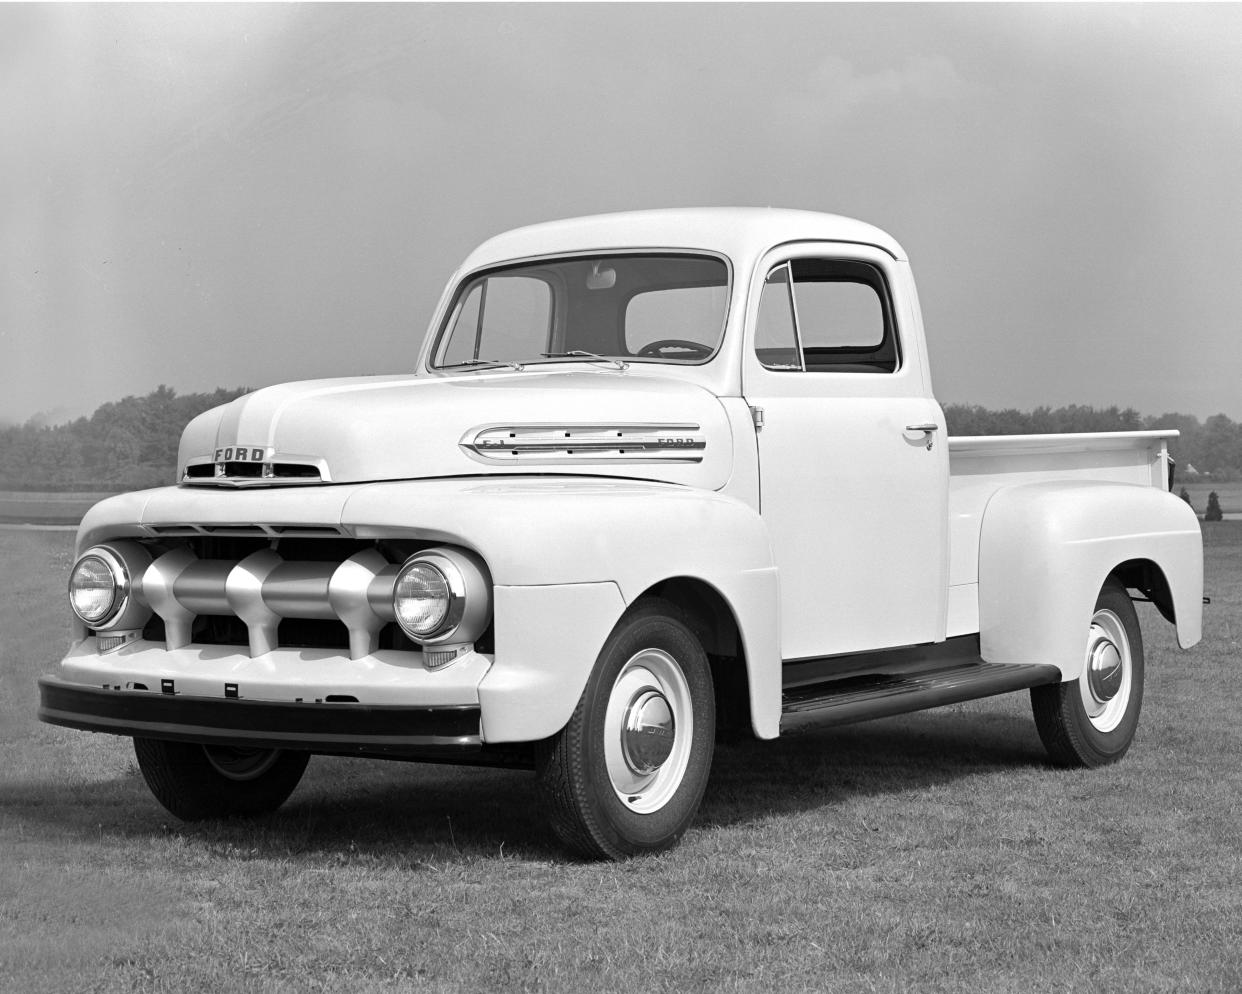 This 1951 Ford F-1, "built stronger to last longer," was among the first generation of F-Series pickups built between 1948-52. It debuted after World War II, purchased mostly by farmers and small businesses. Ford built nearly 290,000 trucks that first year.